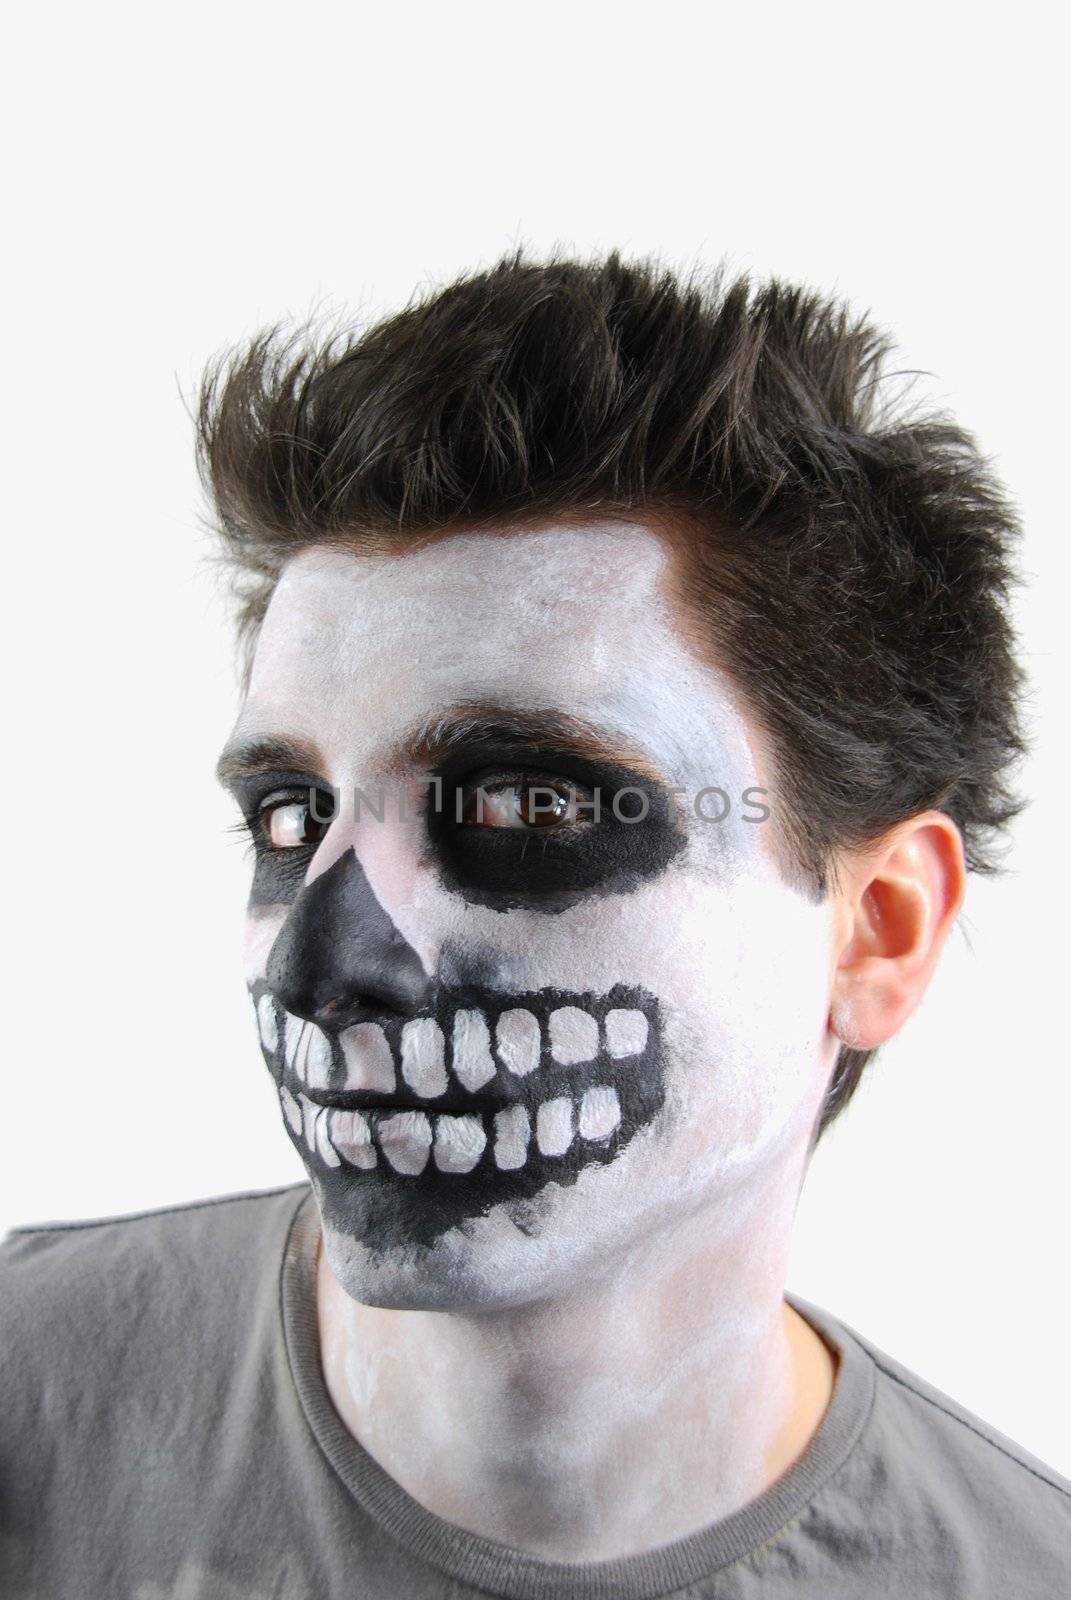 Creepy skeleton guy (Carnival face painting) by luissantos84